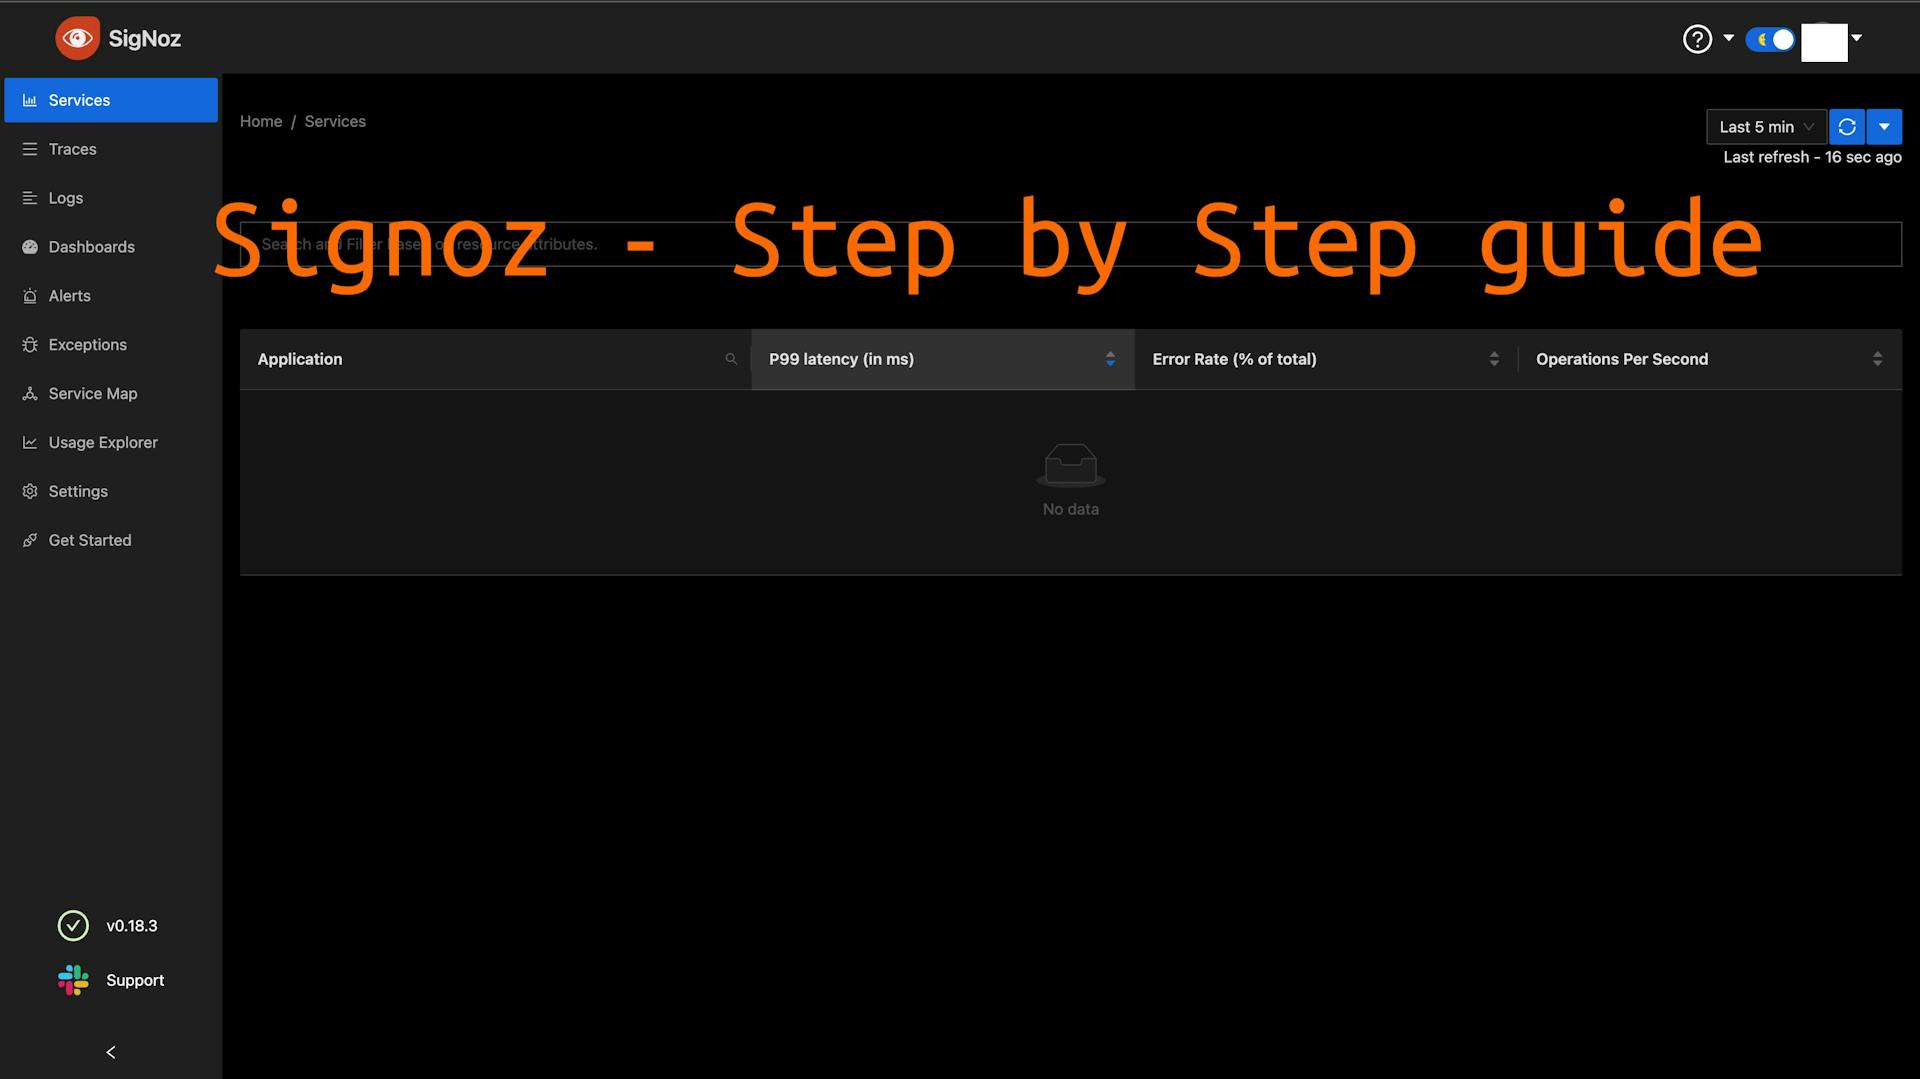 Signoz - Step by Step detailed guide to Install